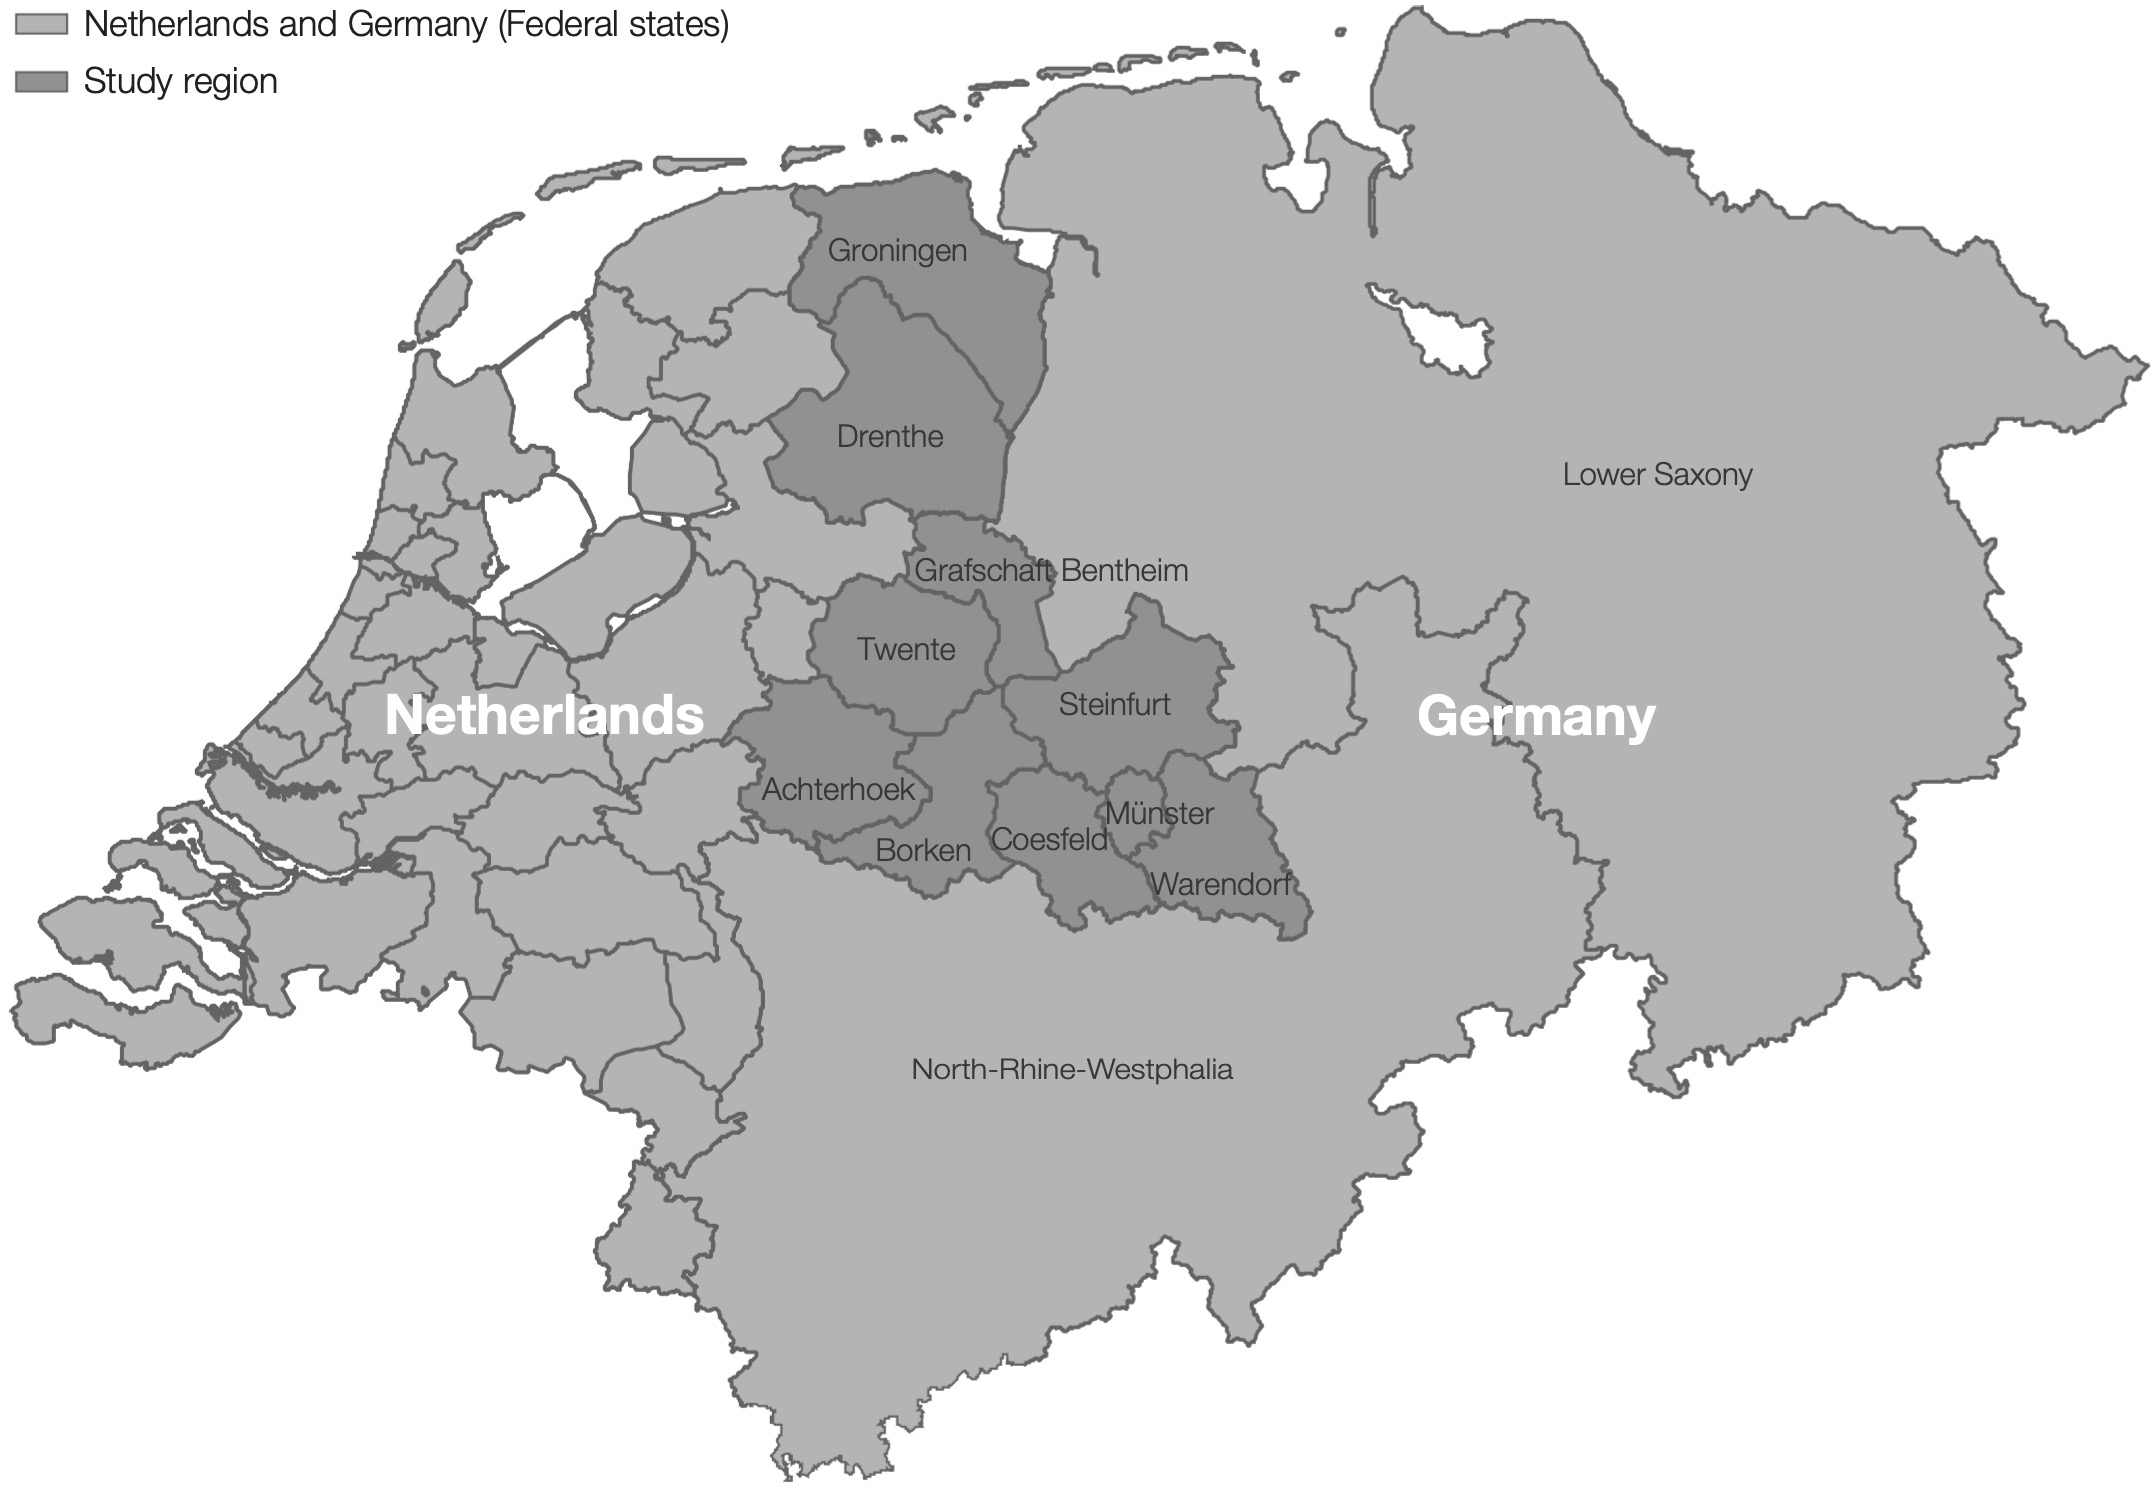 Location of the study region in the Netherlands and Germany, 2012-2016. The dark grey area represents the study region, including the Dutch regions East Groningen (NL111), Delfzijl and surroundings (NL112), rest of Groningen (NL113), North Drenthe (NL 131), South East Drenthe (NL132), South West Drenthe (NL133), Twente (NL213), Achterhoek (NL225), and the German regions Grafschaft Bentheim region (DE94B) and the Münsterland-region with the urban district Münster (DEA33) and the rural districts Borken (DEA34), Coesfeld (DEA35), Steinfurt (DEA37) and Warendorf (DEA38).